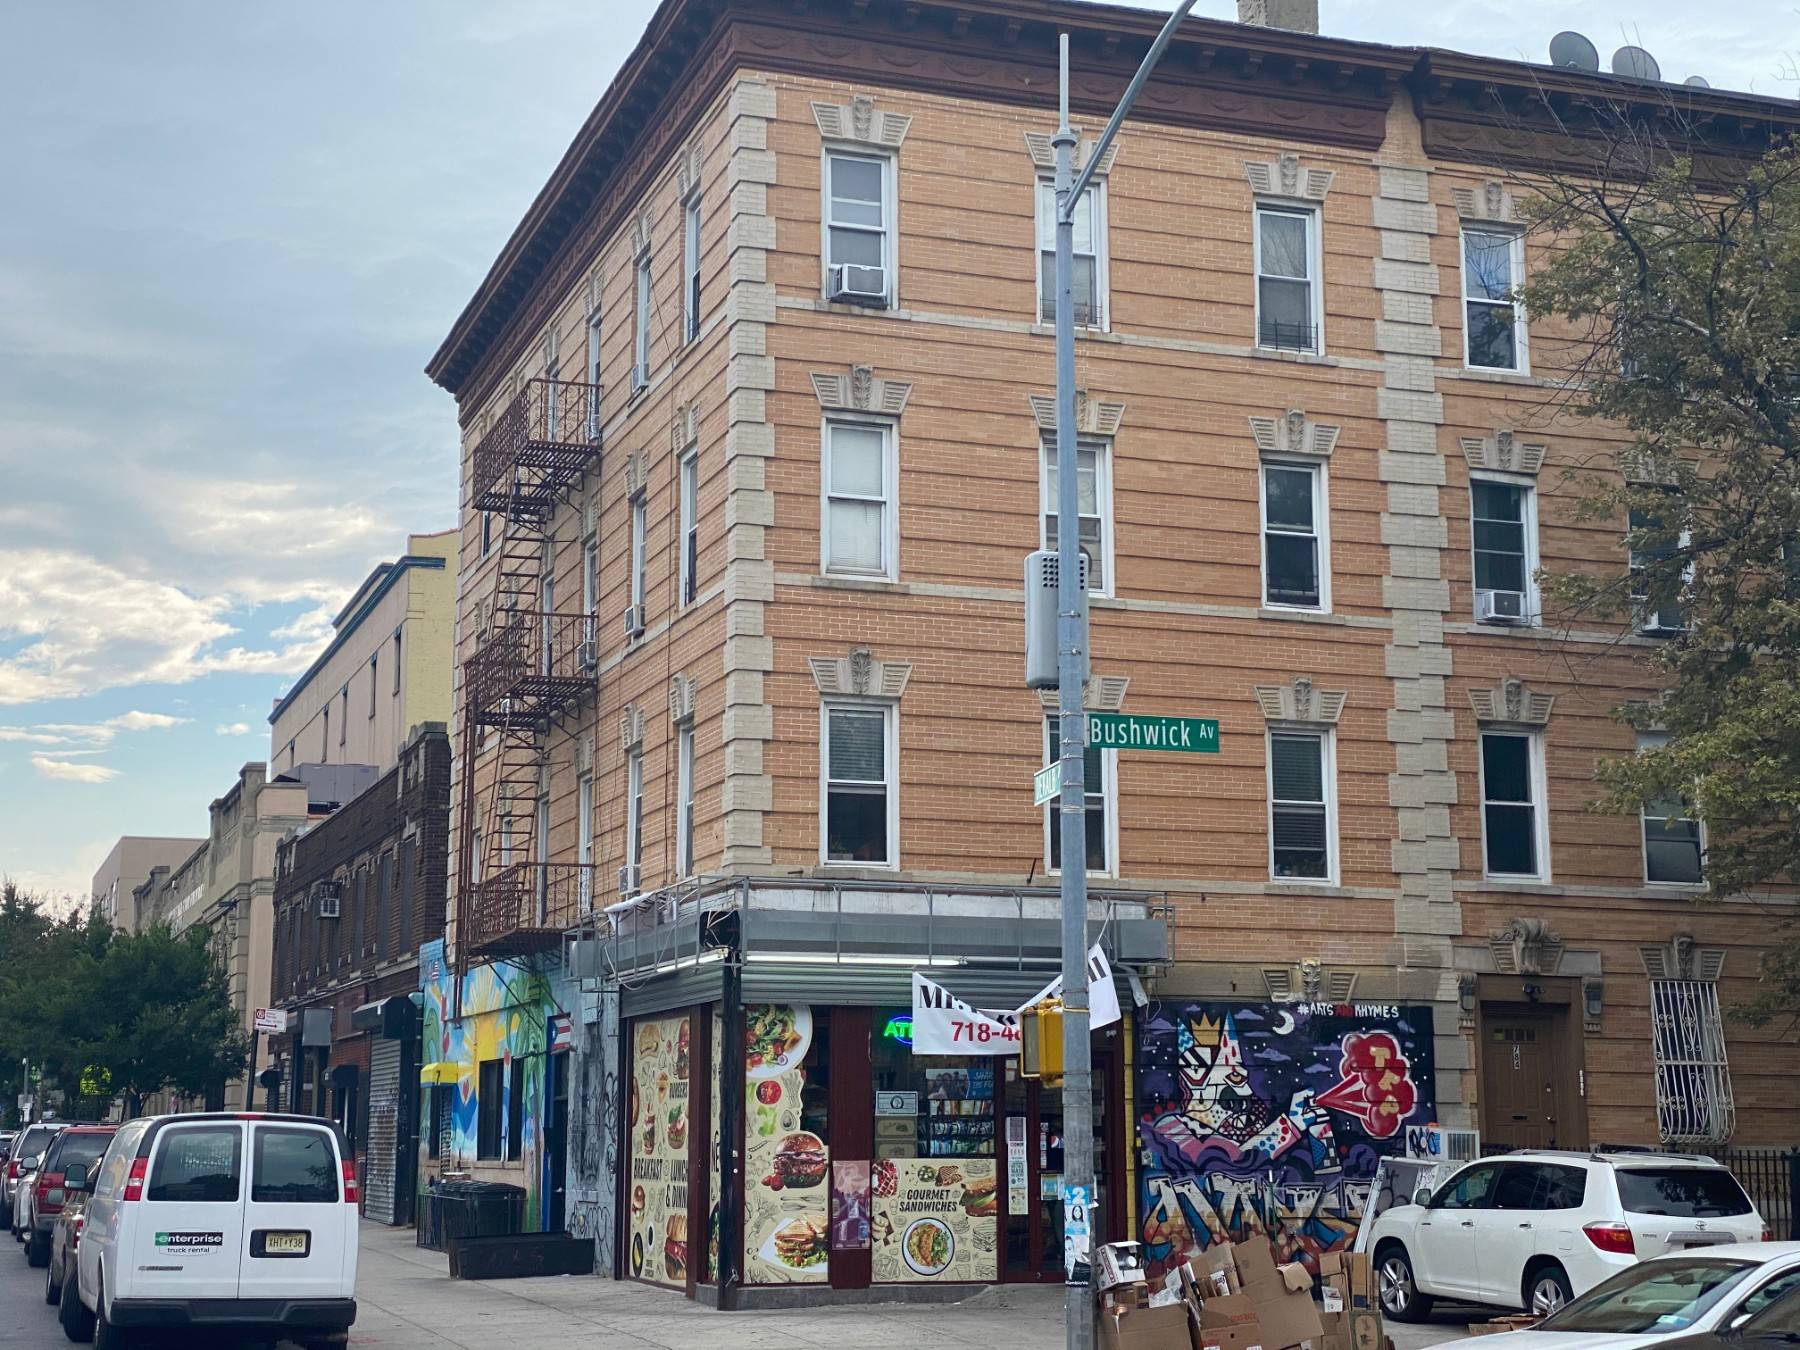 786 Bushwick Avenue is a 4 story rental unit building with a ground floor business situated on the corner of Bushwick Avenue and Dekalb Avenue.